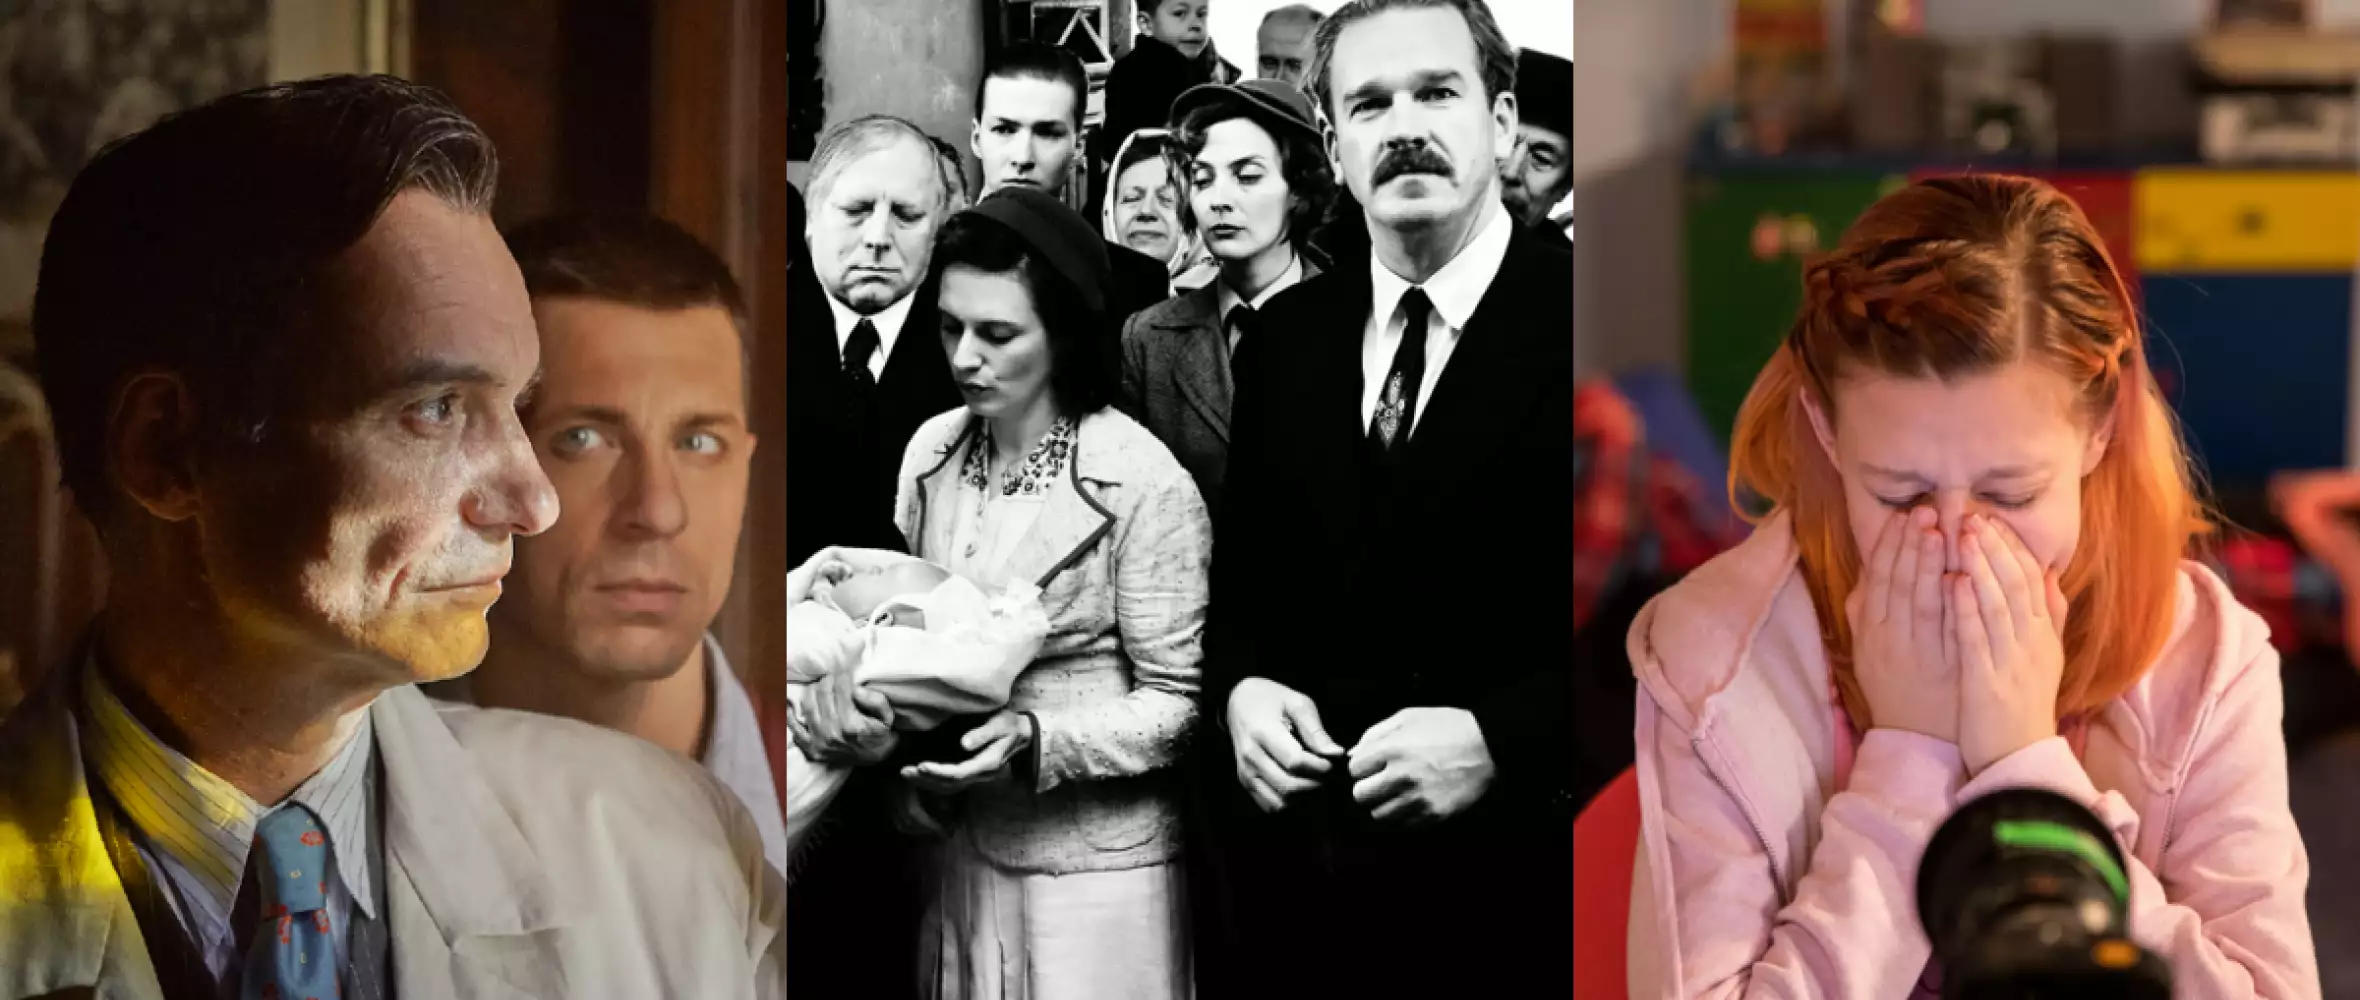 Czech Film Critics' Awards: Charlatan & Shadow Country lead the nominations